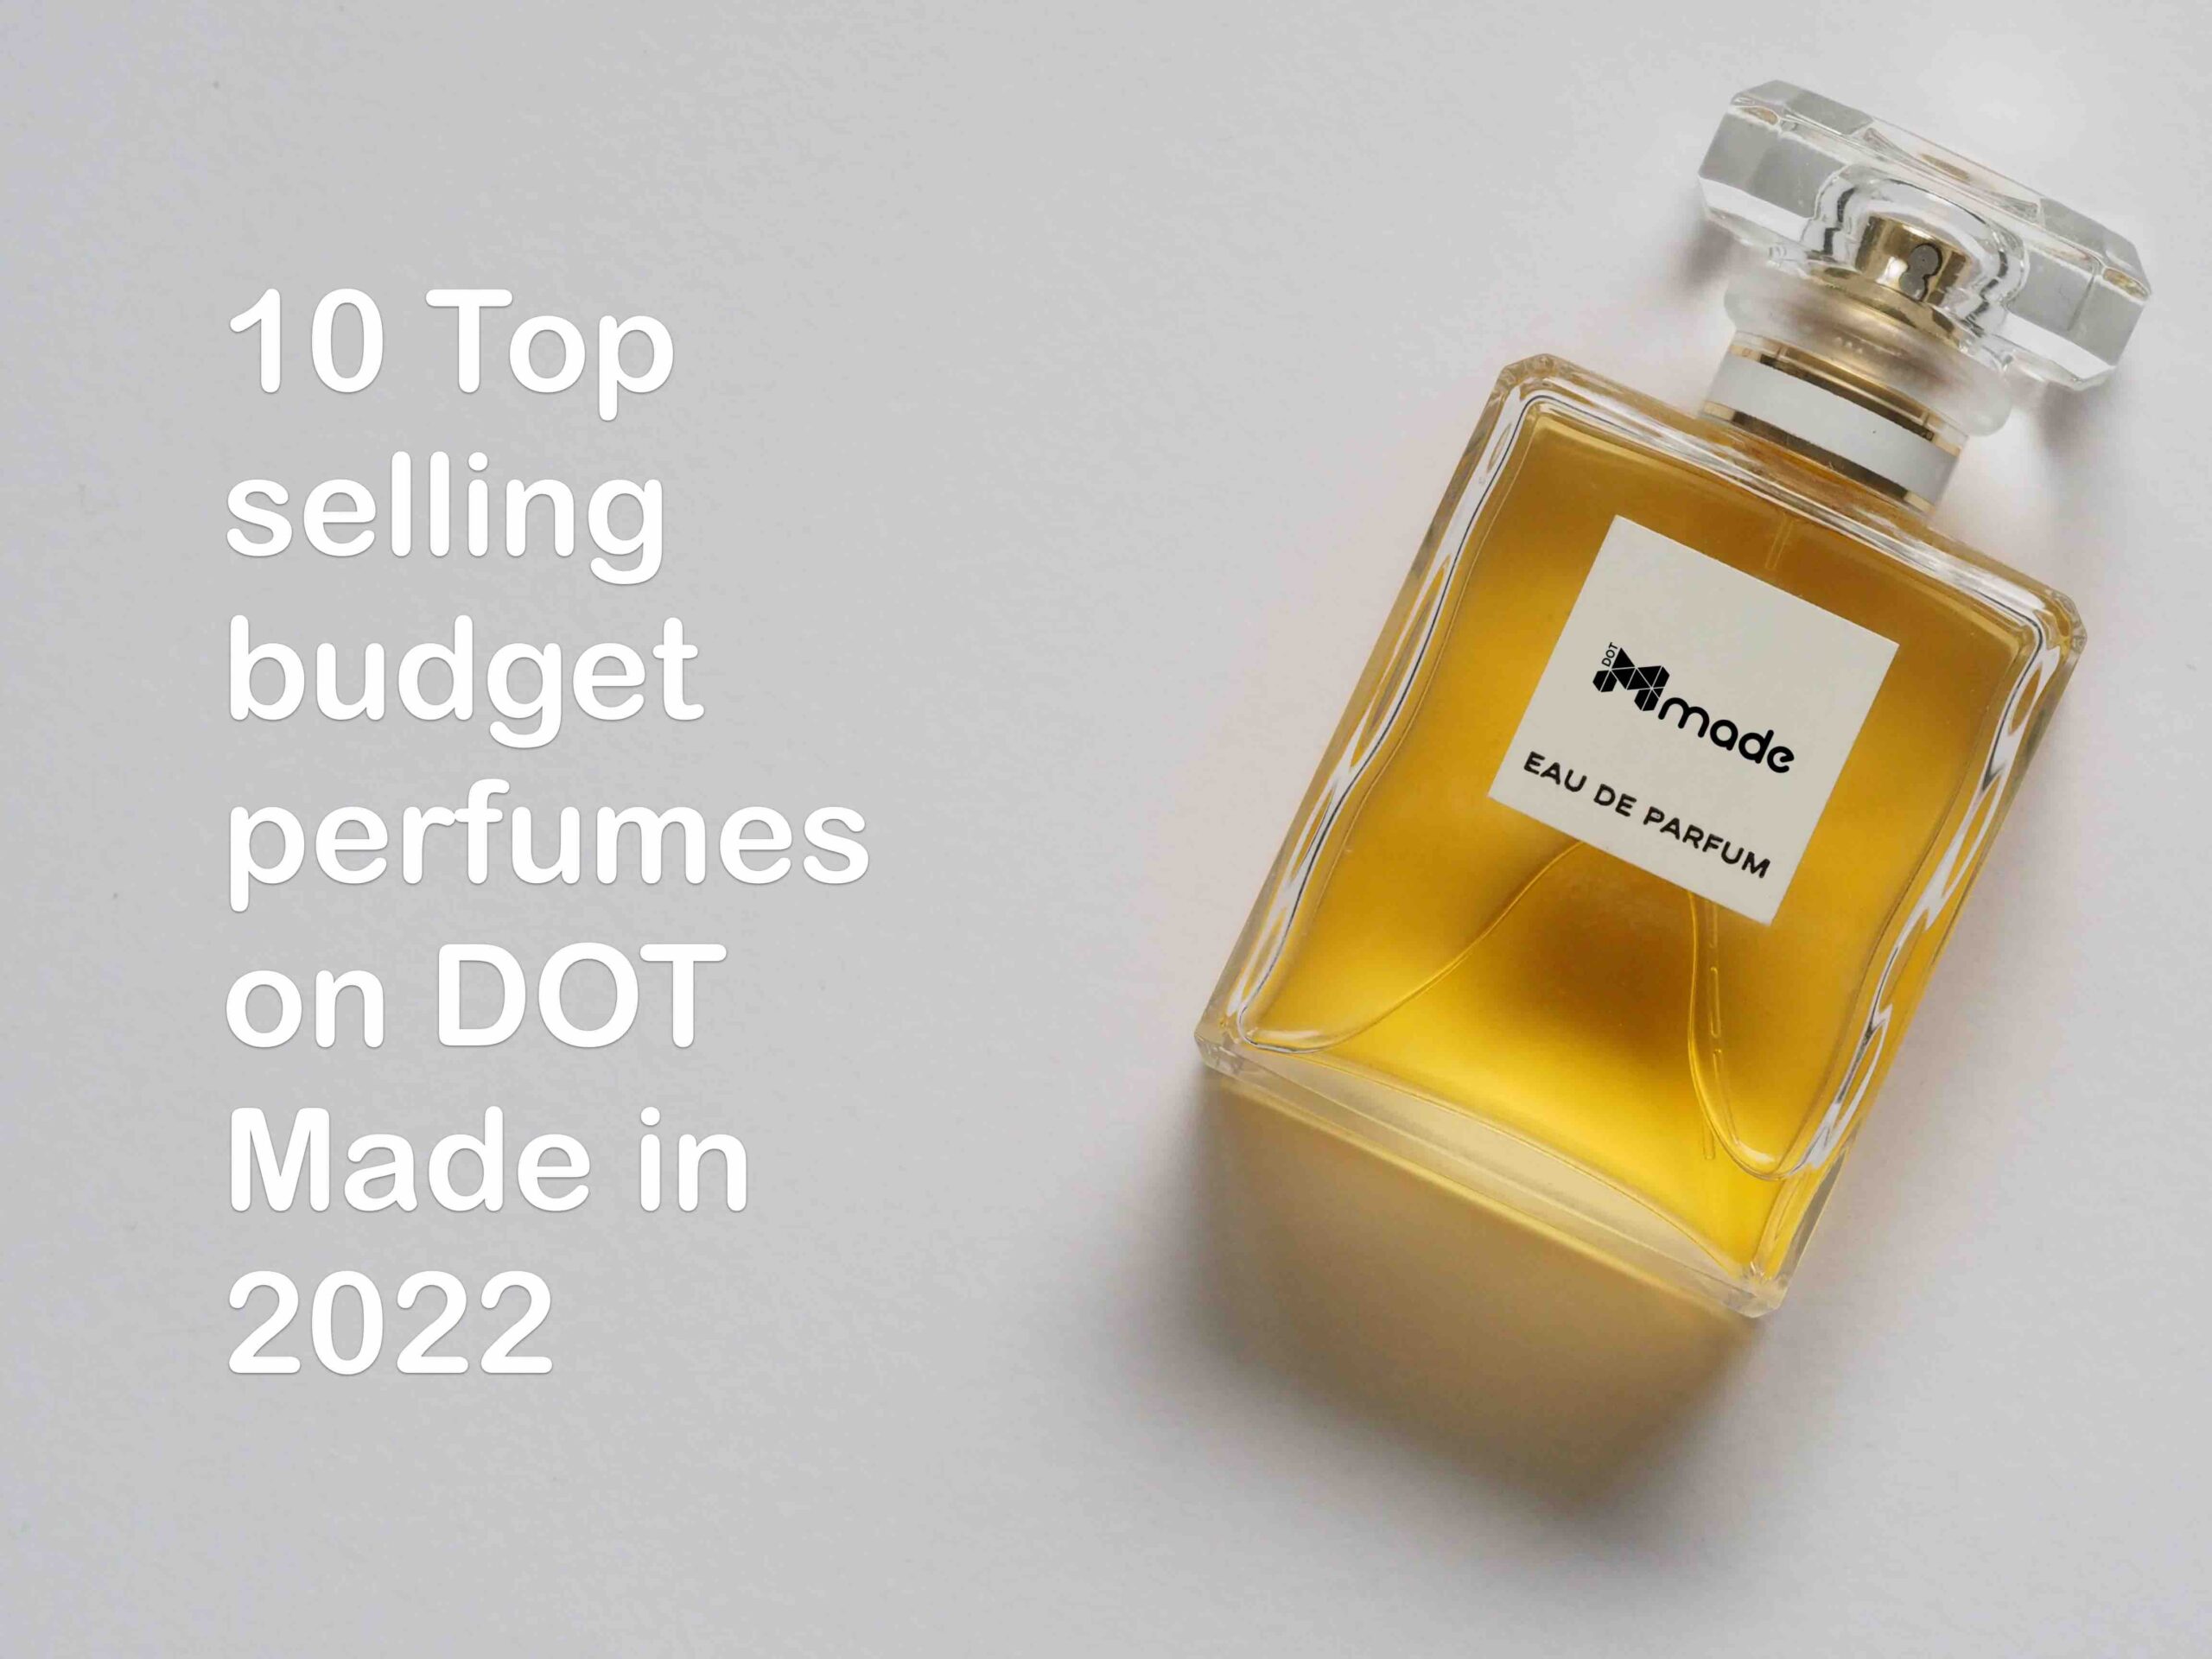 10 Top selling budget perfumes on DOT Made in 2022 - DOT Made